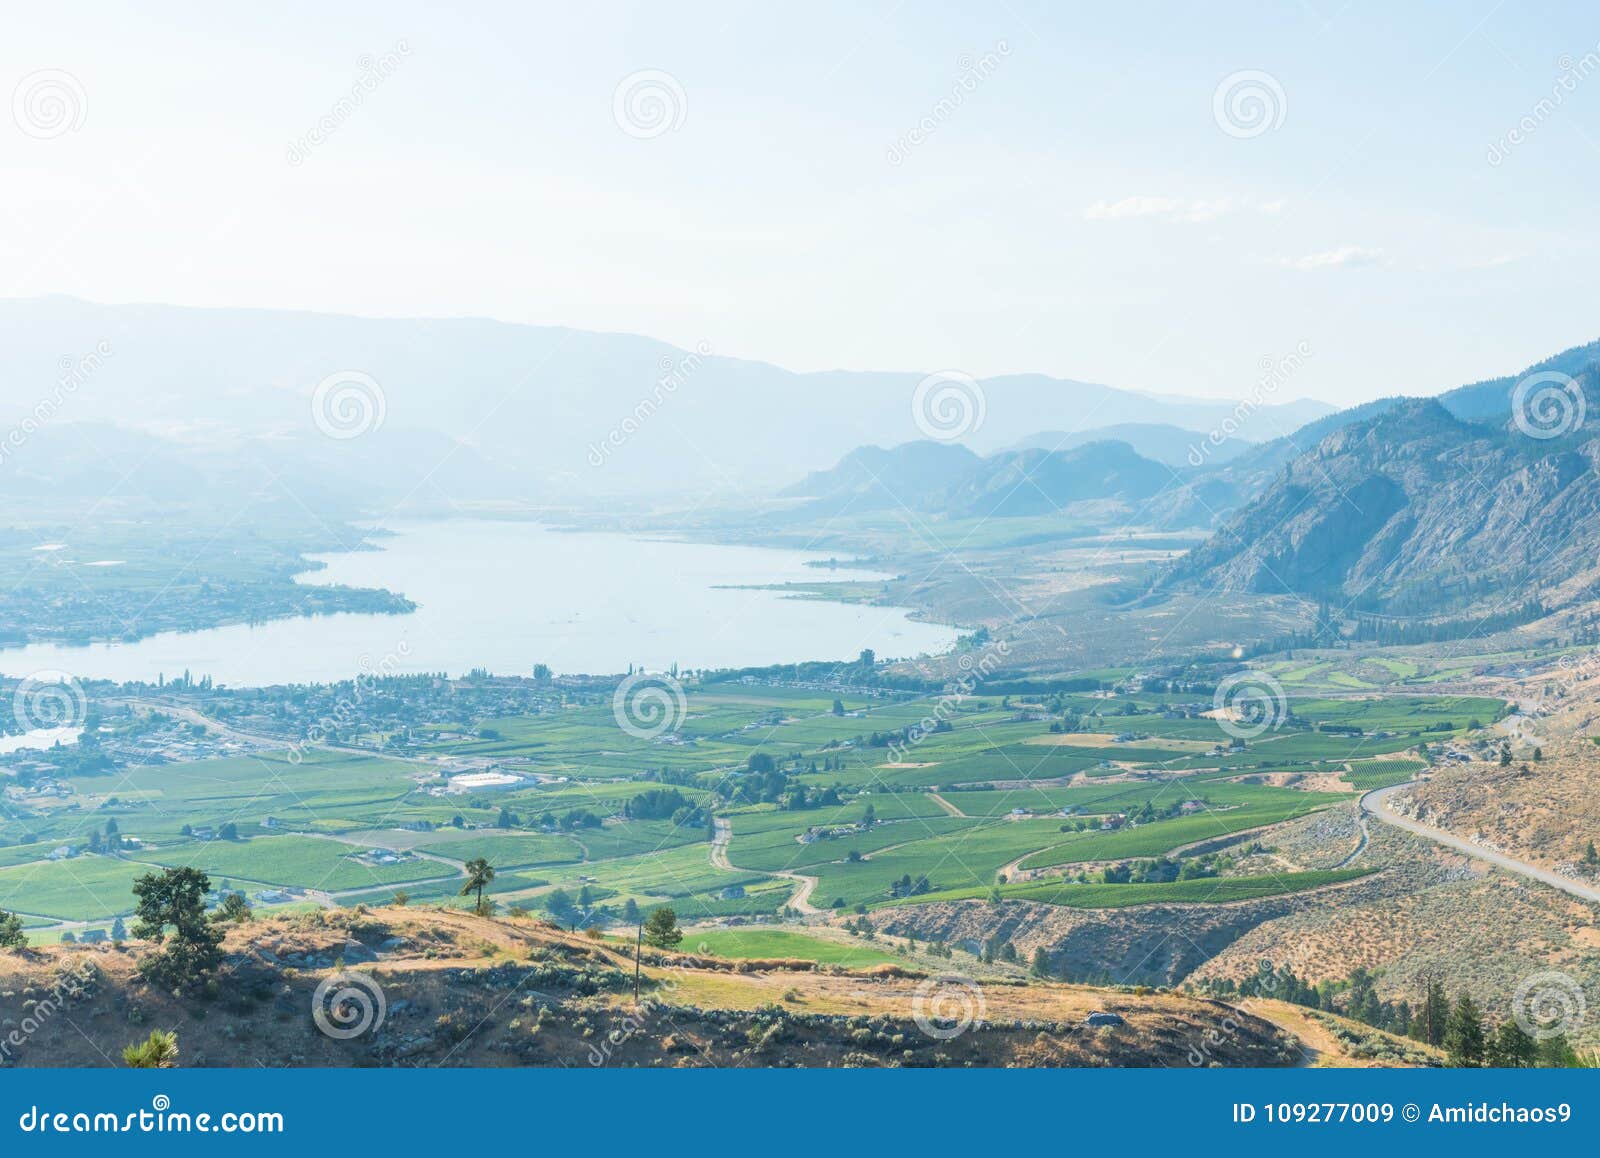 view of osoyoos and osoyoos lake from anarchist mountain in summer